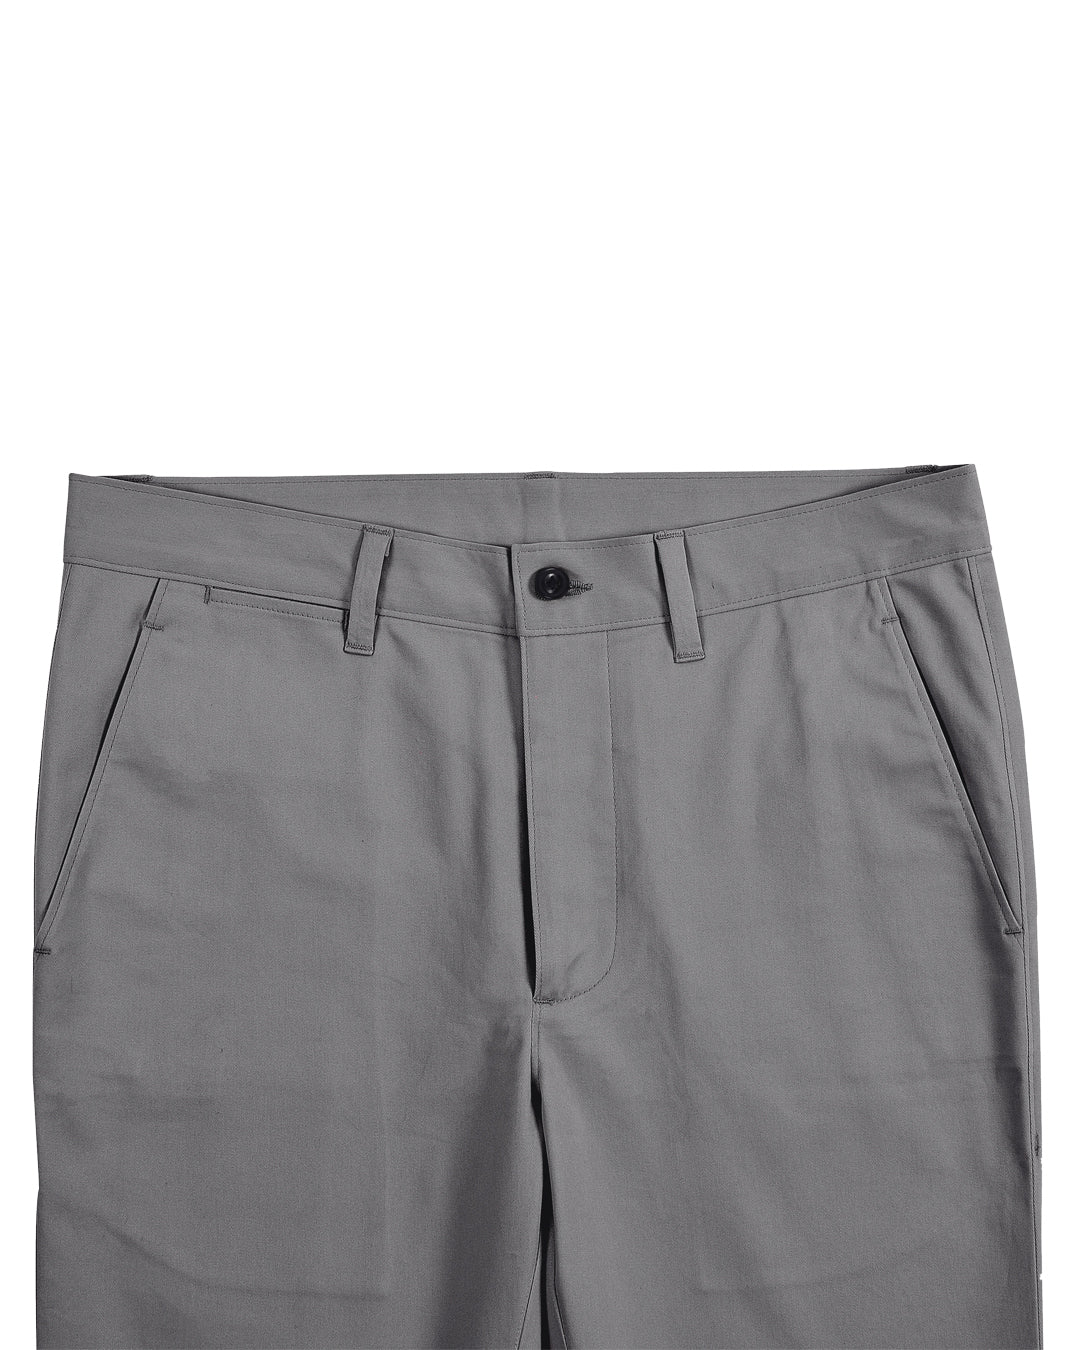 Front view of custom Genoa Chino pants for men by Luxire in dark grey